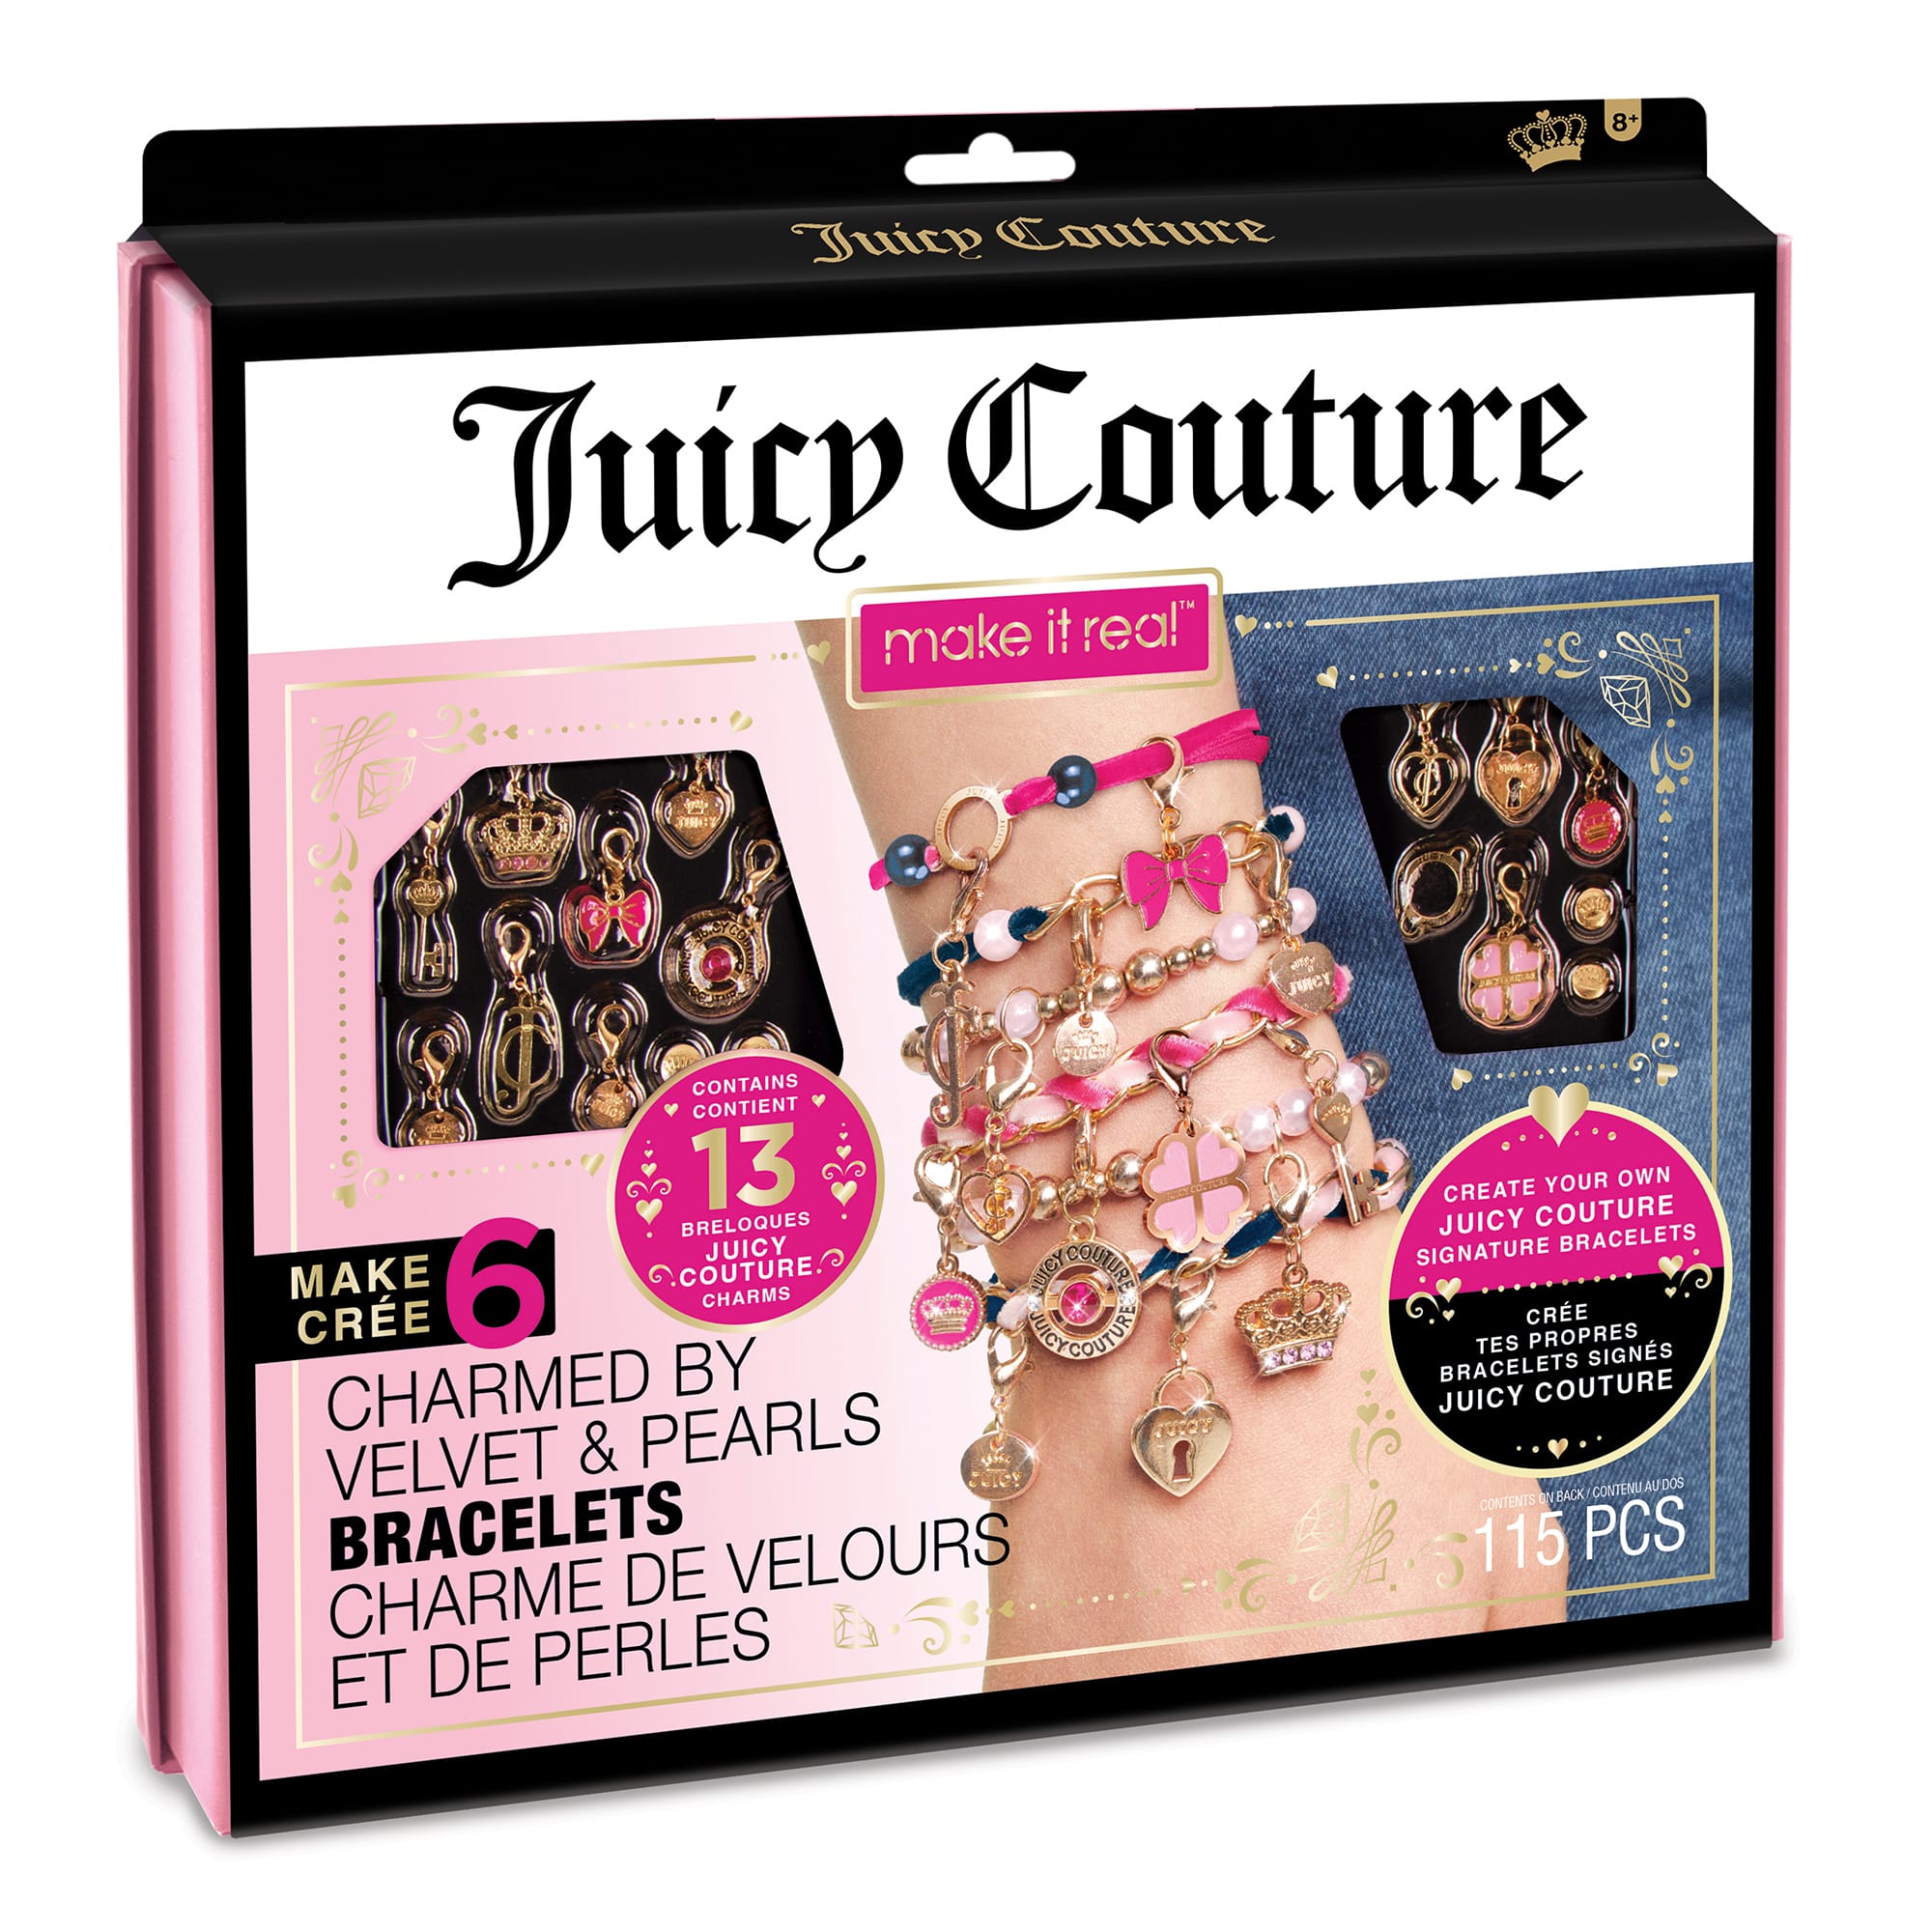 Make It Real Juicy Couture Charm Bracelet Kit - 115 ct